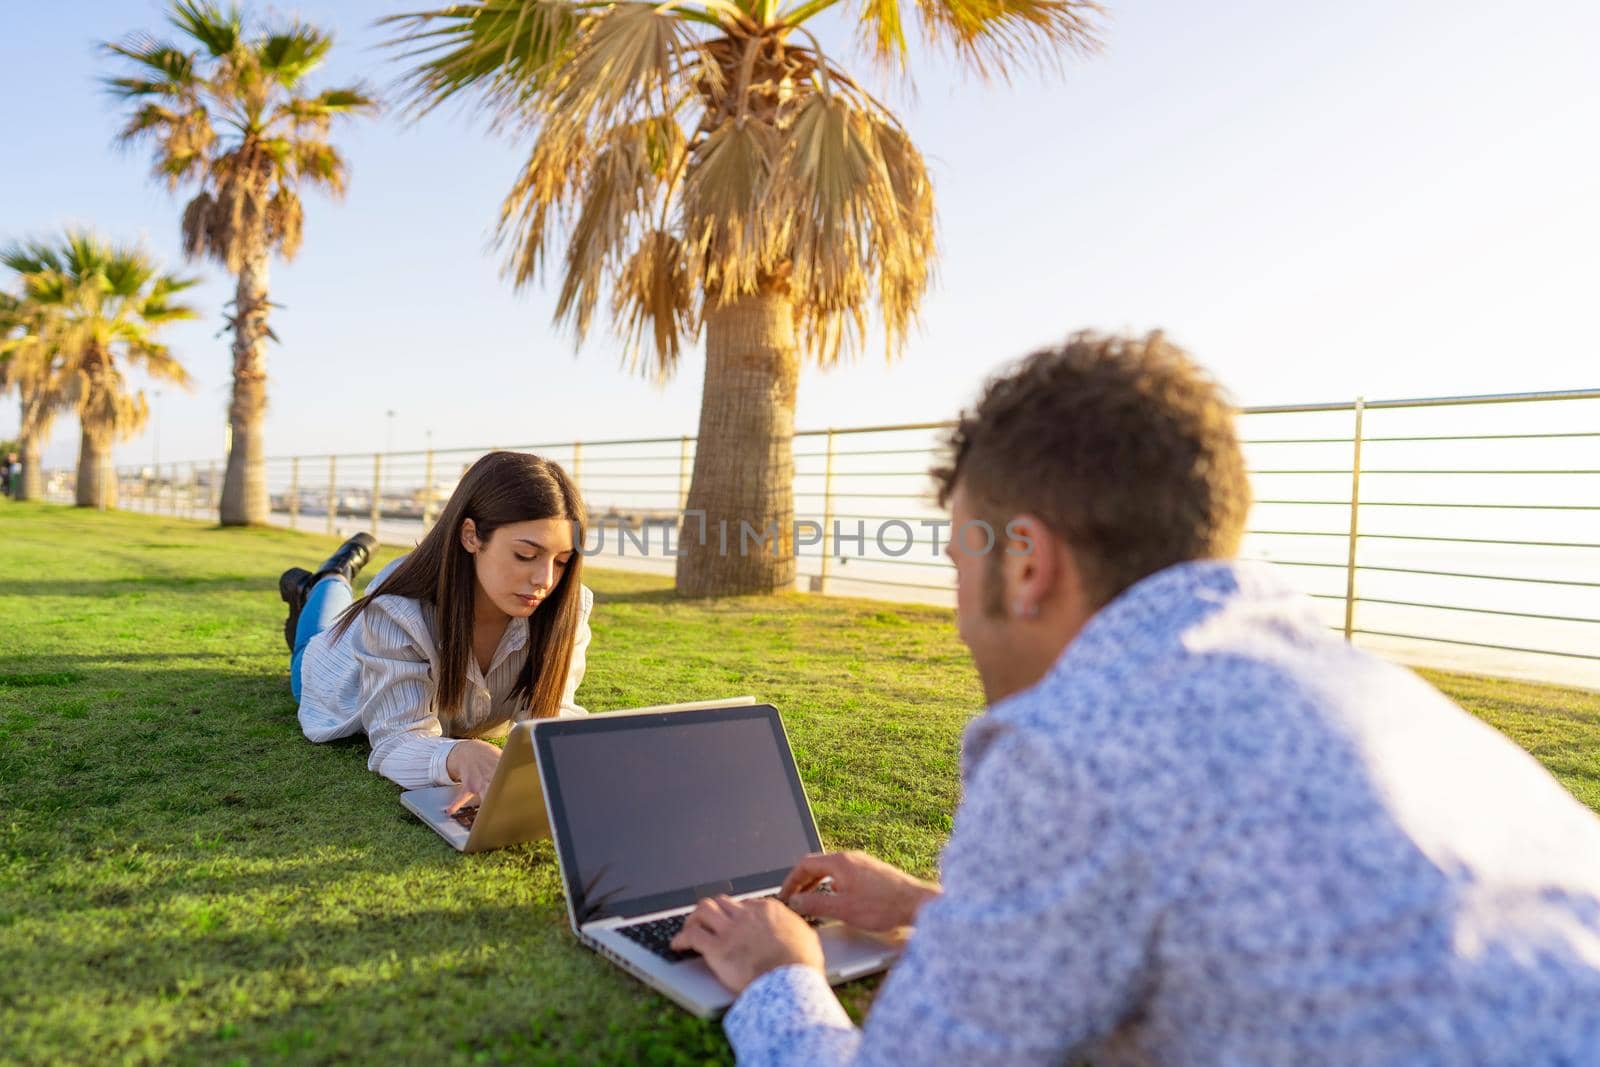 Young couple lying on the grass in smart working with laptop facing each other at sunset or dawn. New normal activity of job or study outdoor with internet wireless connection technology